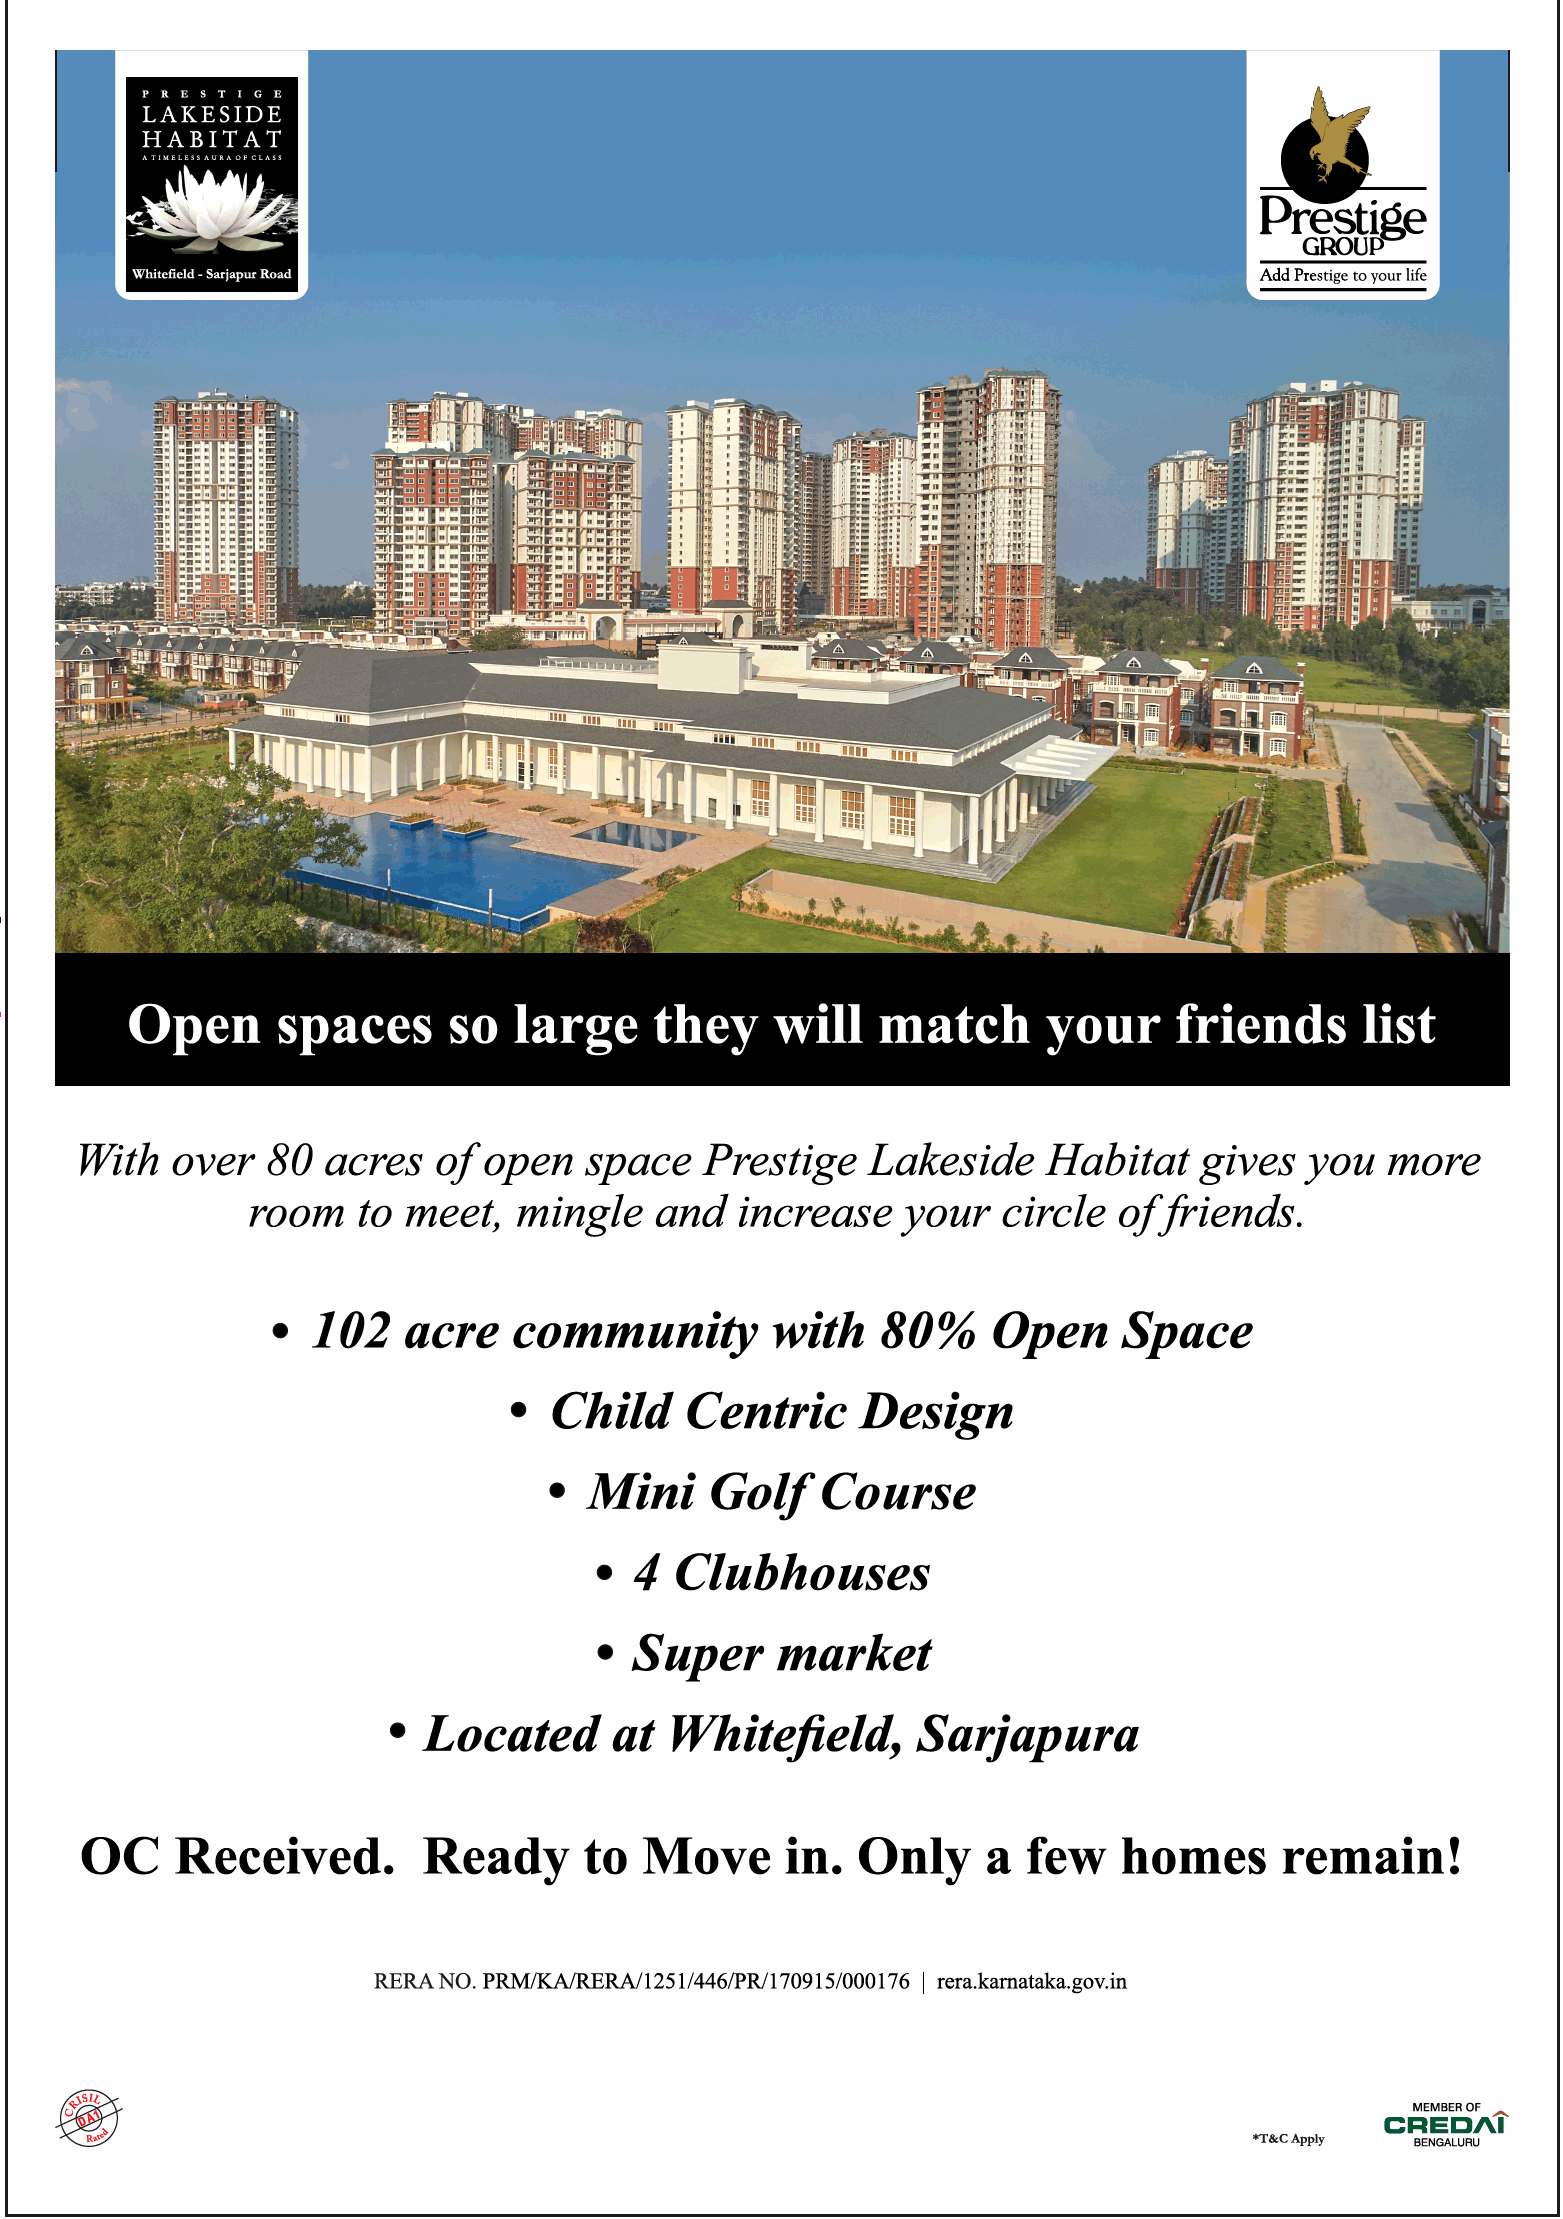 OC received, ready to move in, only a few homes remain at Prestige Lakeside Habitat, Bangalore Update